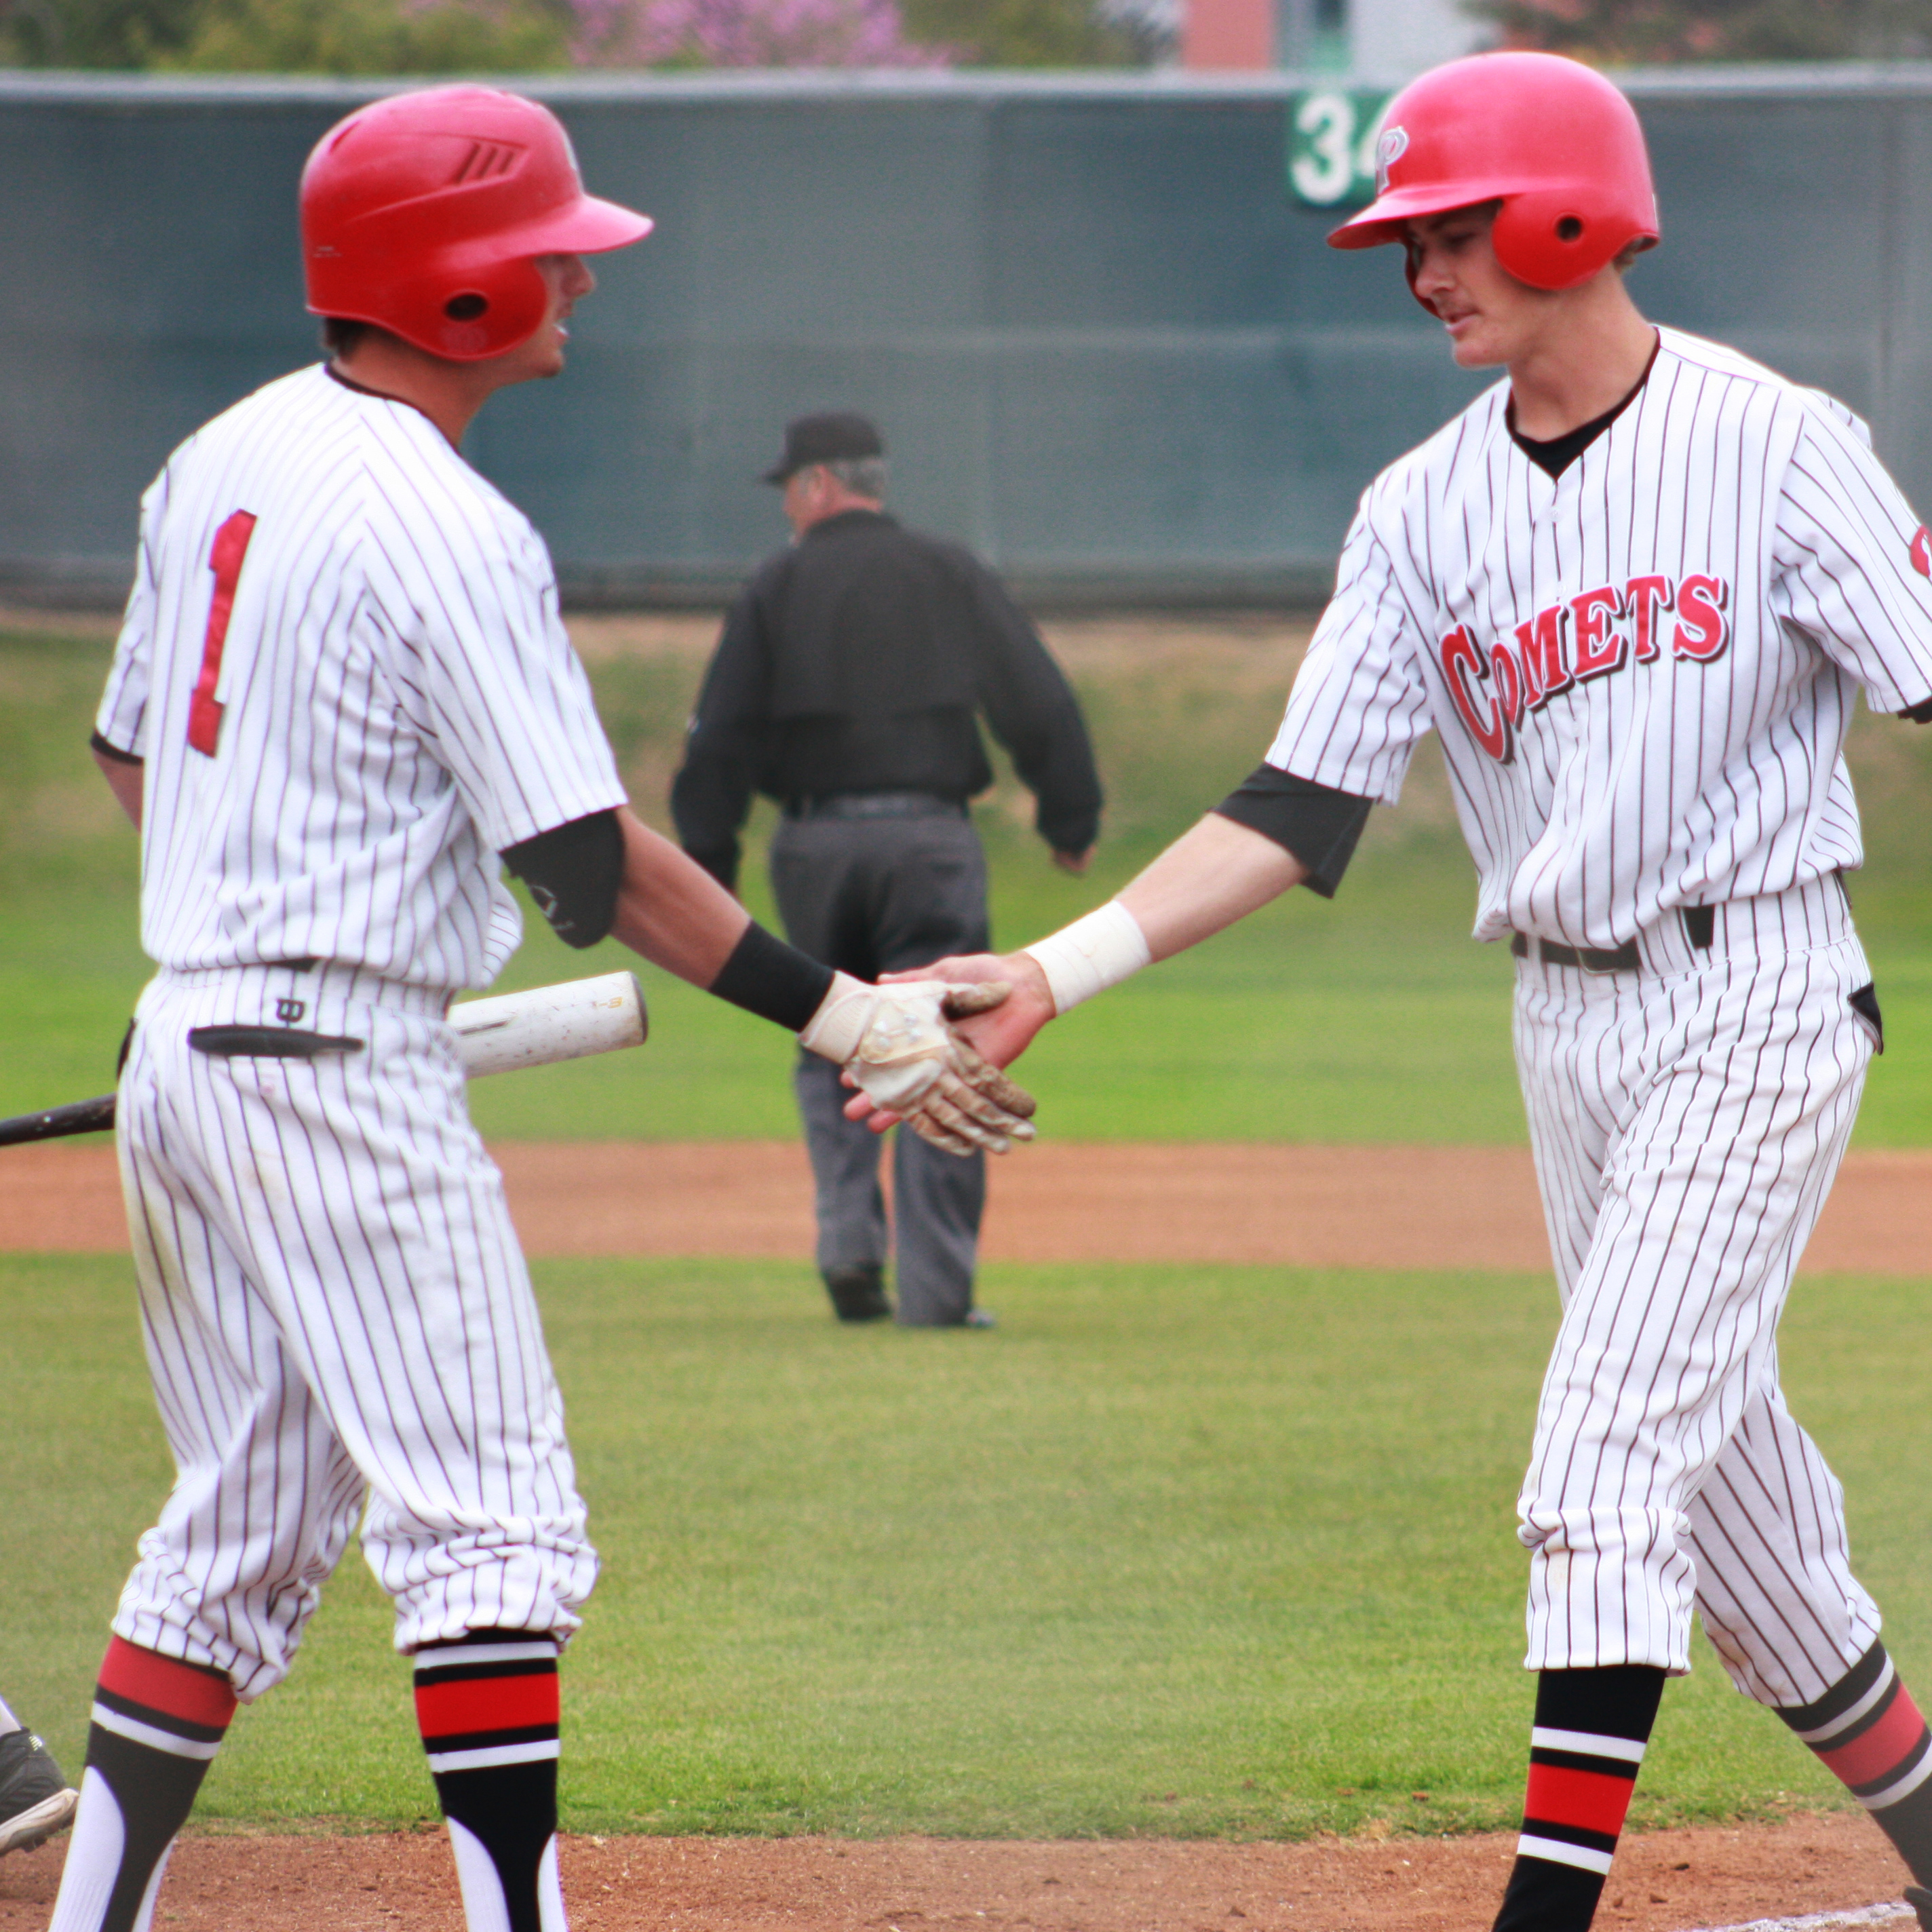 Palomar outfielder Dillan Smith is congratulated by Mat Matlock after scoring in the first inning against San Diego City College on March 25 at Myer’s Field. Smith, the defending Pacific Coast Athletic Conference Men’s Athlete of the Week, went 2-5 with an RBI in the Comets 6-1 win over the Knights. The win improved Palomar’s conference record to 11-2. (Scott Colson/The Telescope)